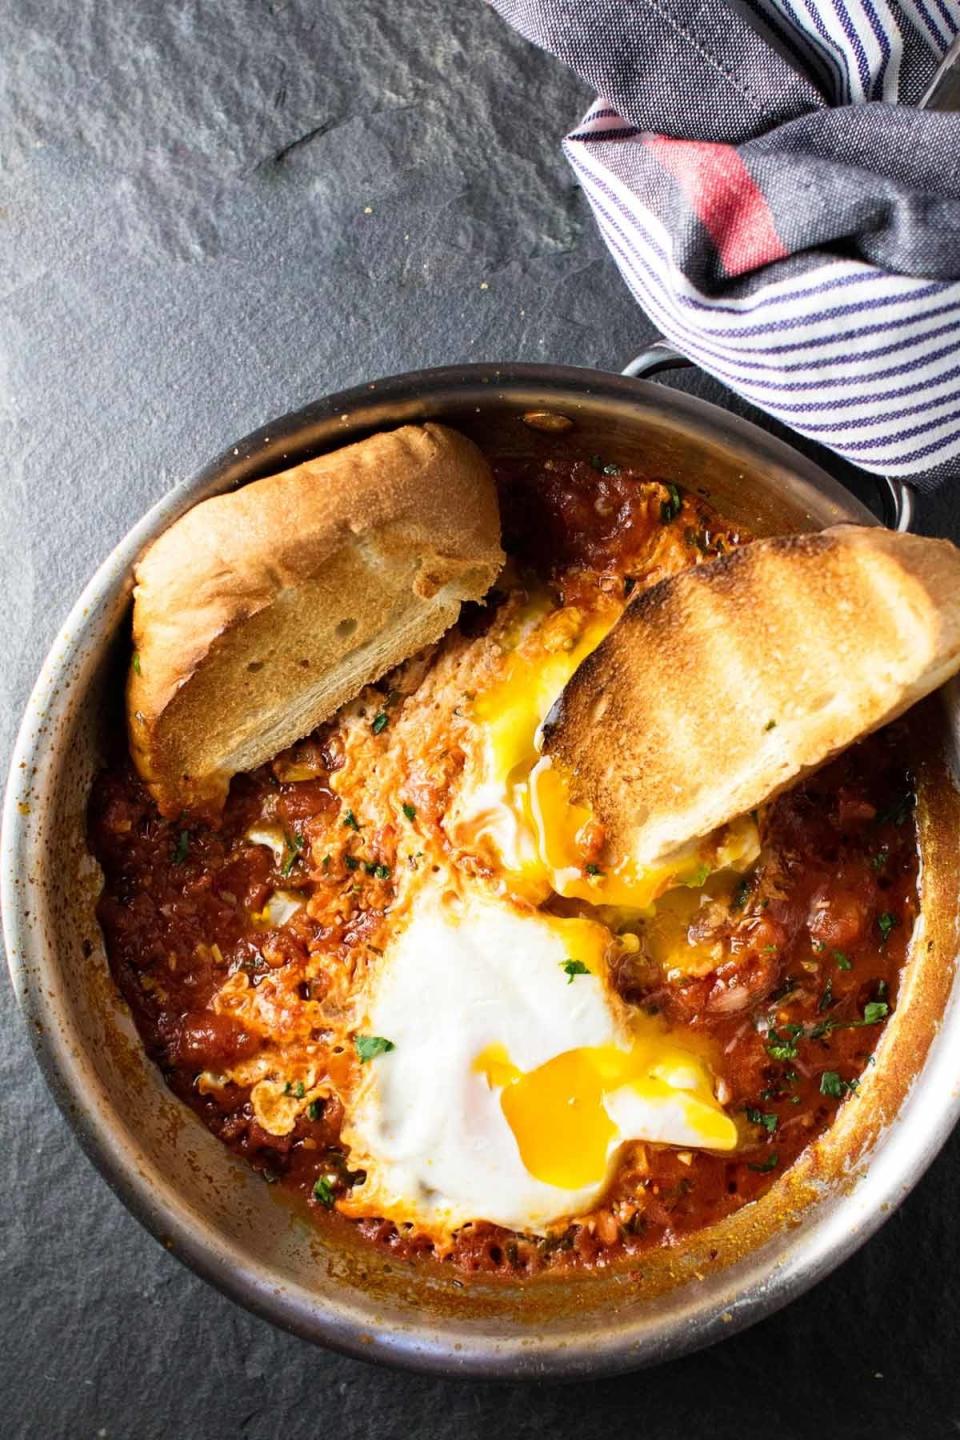 Eggs baked in tomato sauce with bread for dunking.